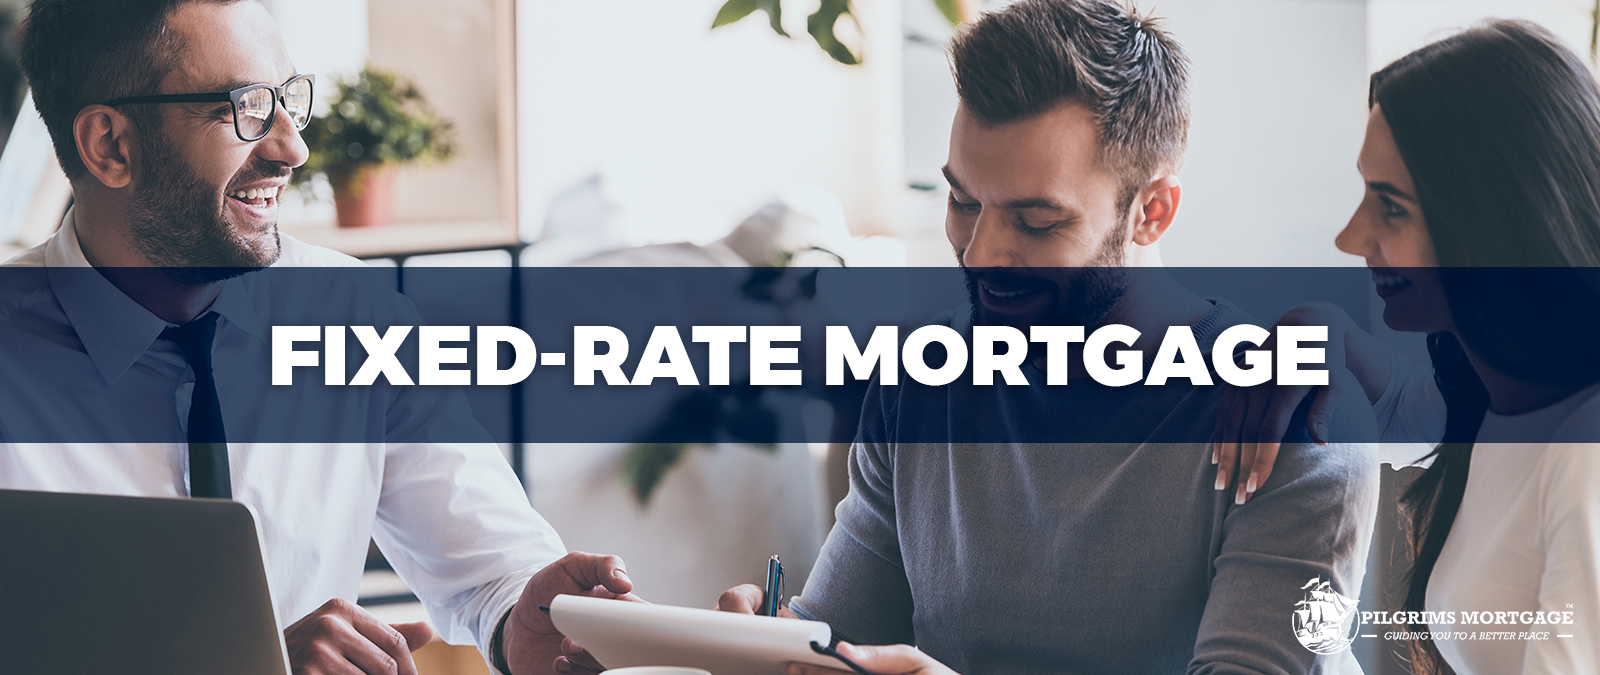 FIXED RATE MORTGAGE